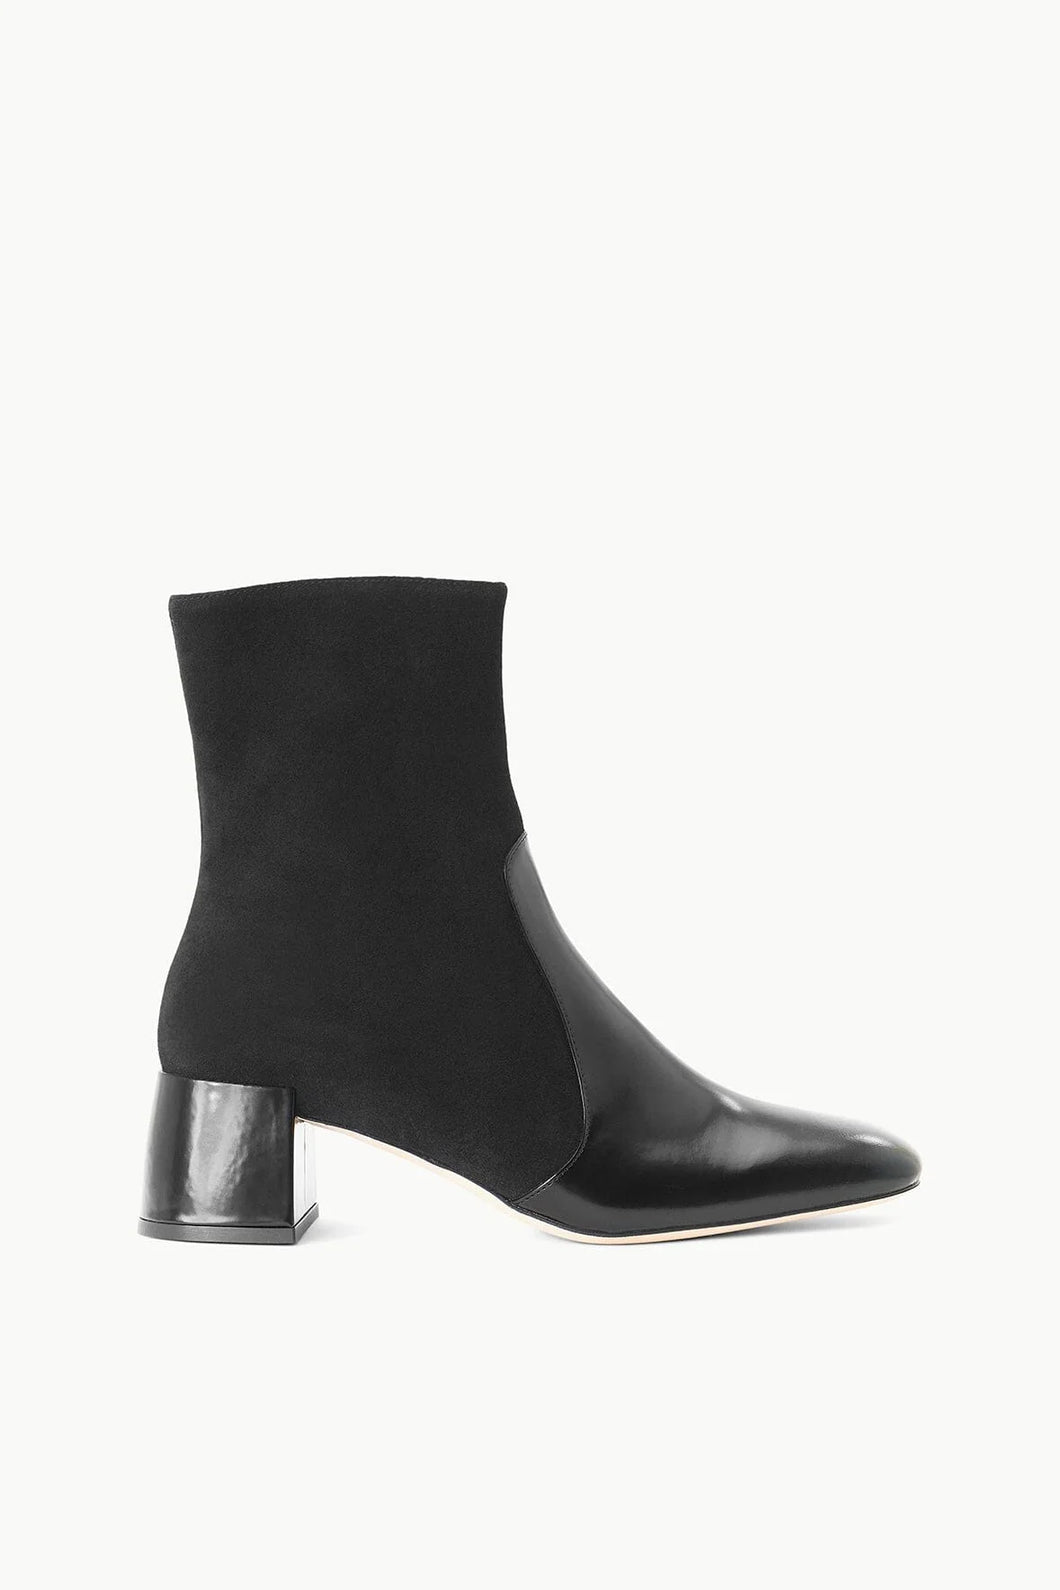 STAUD - Andy Ankle Boot - Black